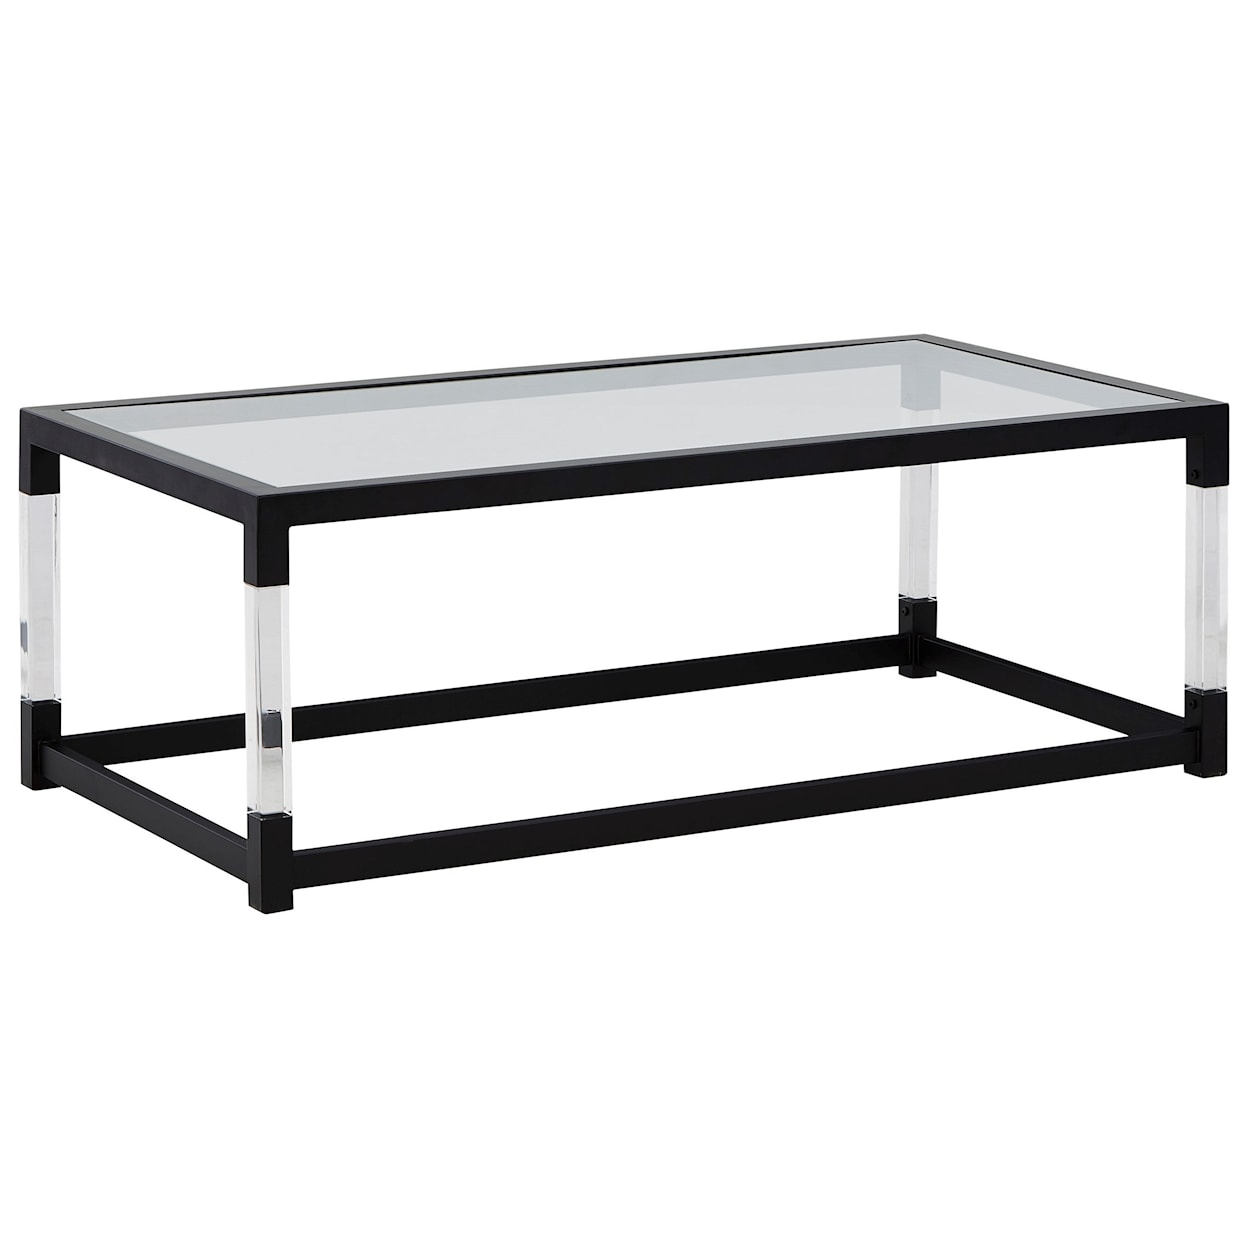 Signature Design by Ashley Furniture Nallynx Coffee Table